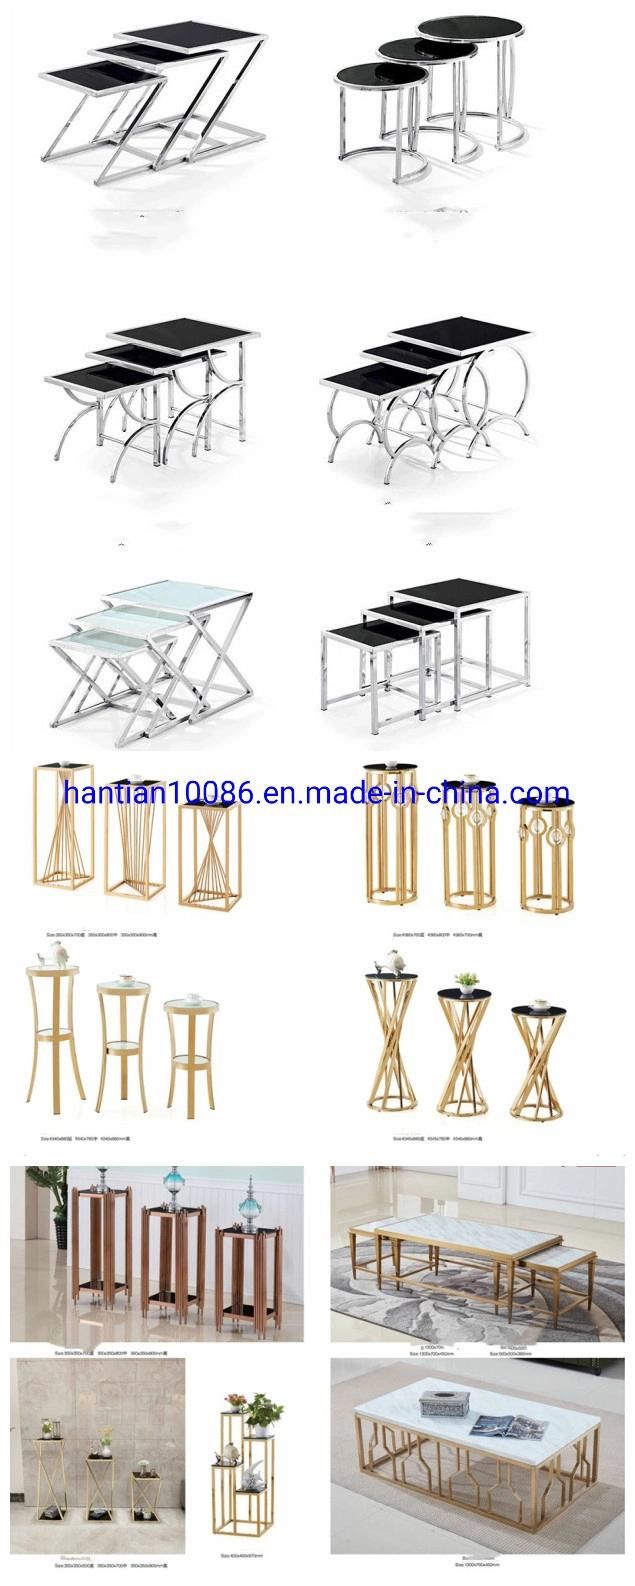 Gold Furniture Table Set Retail Shop Furniture Coffee Shop Tables and Chairs